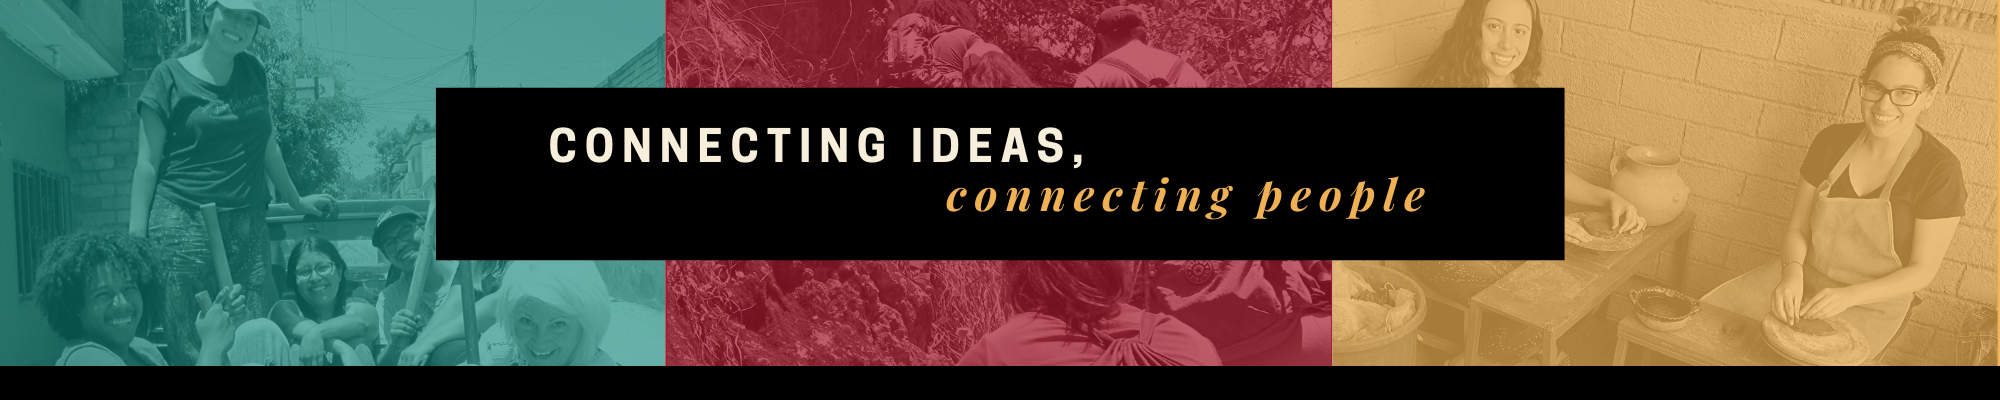 Connecting Ideas, Connecting People